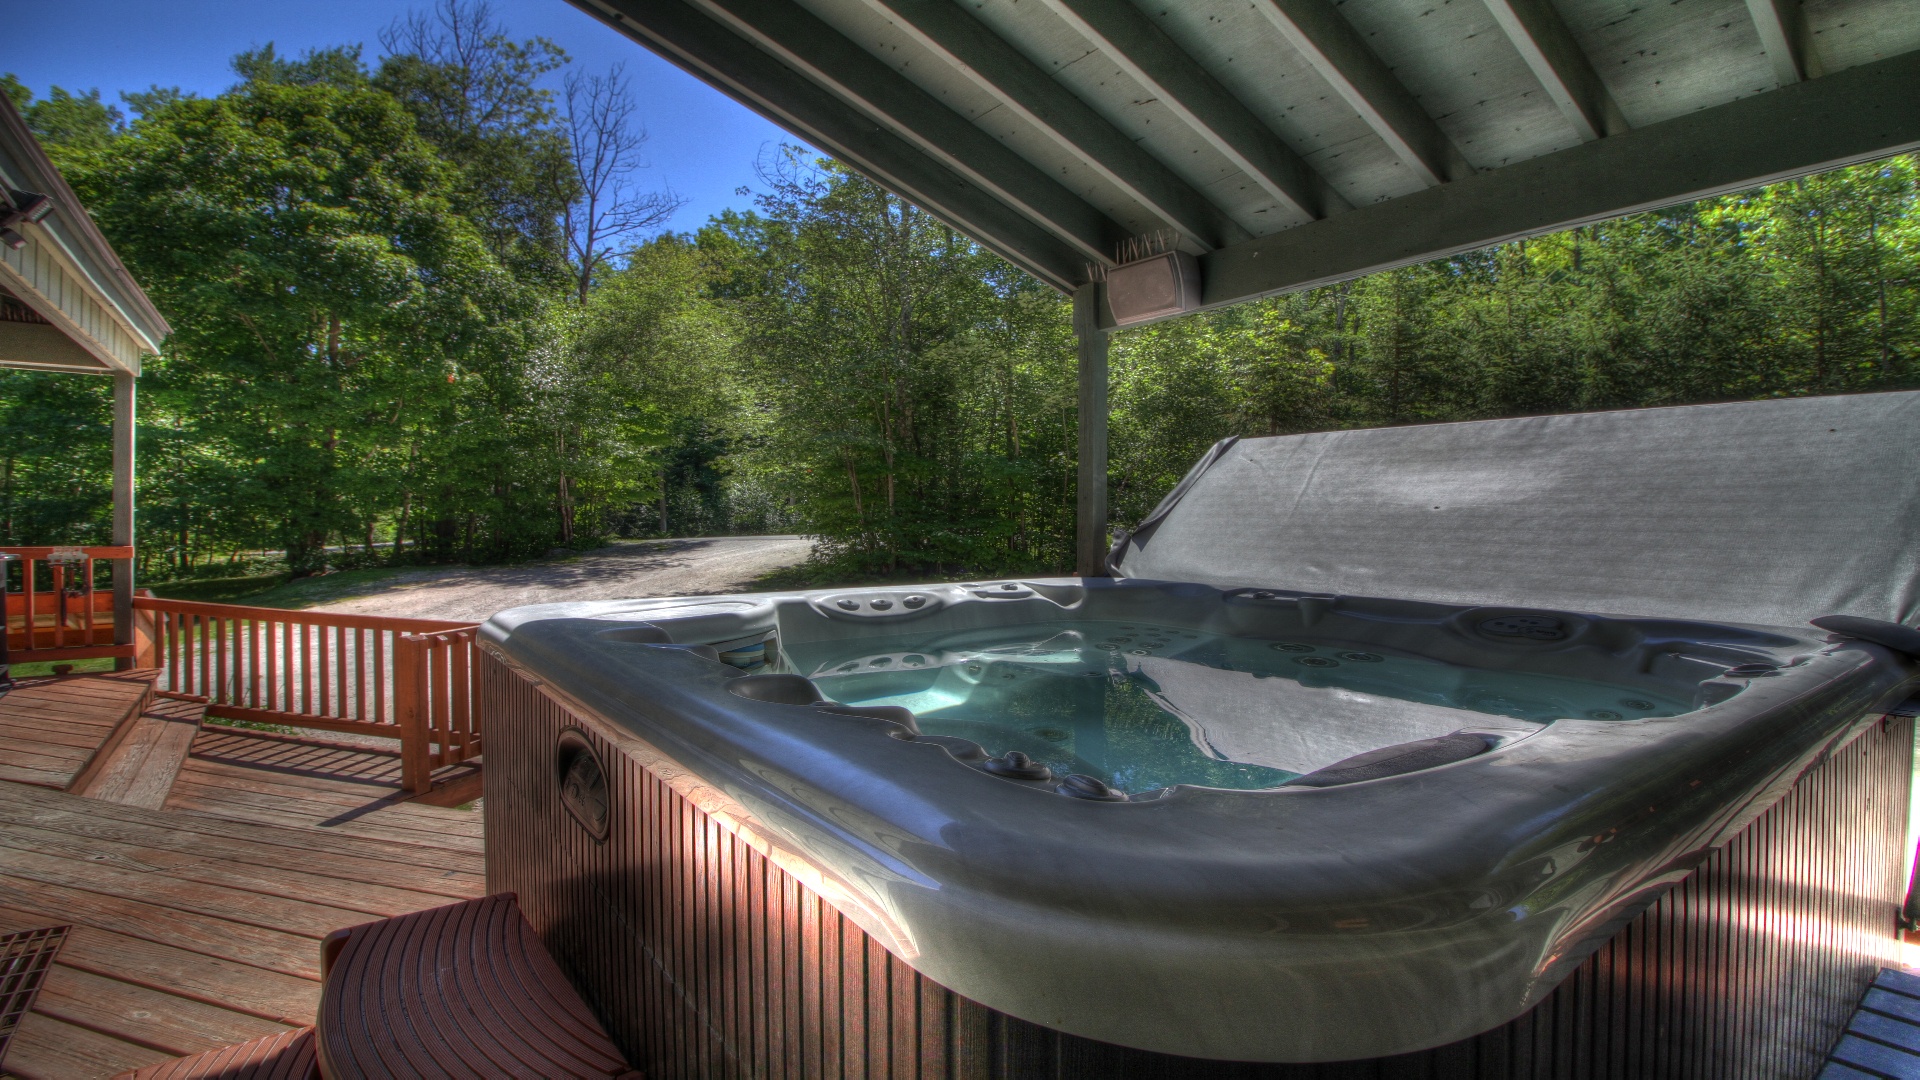 Great hot tub on the deck!